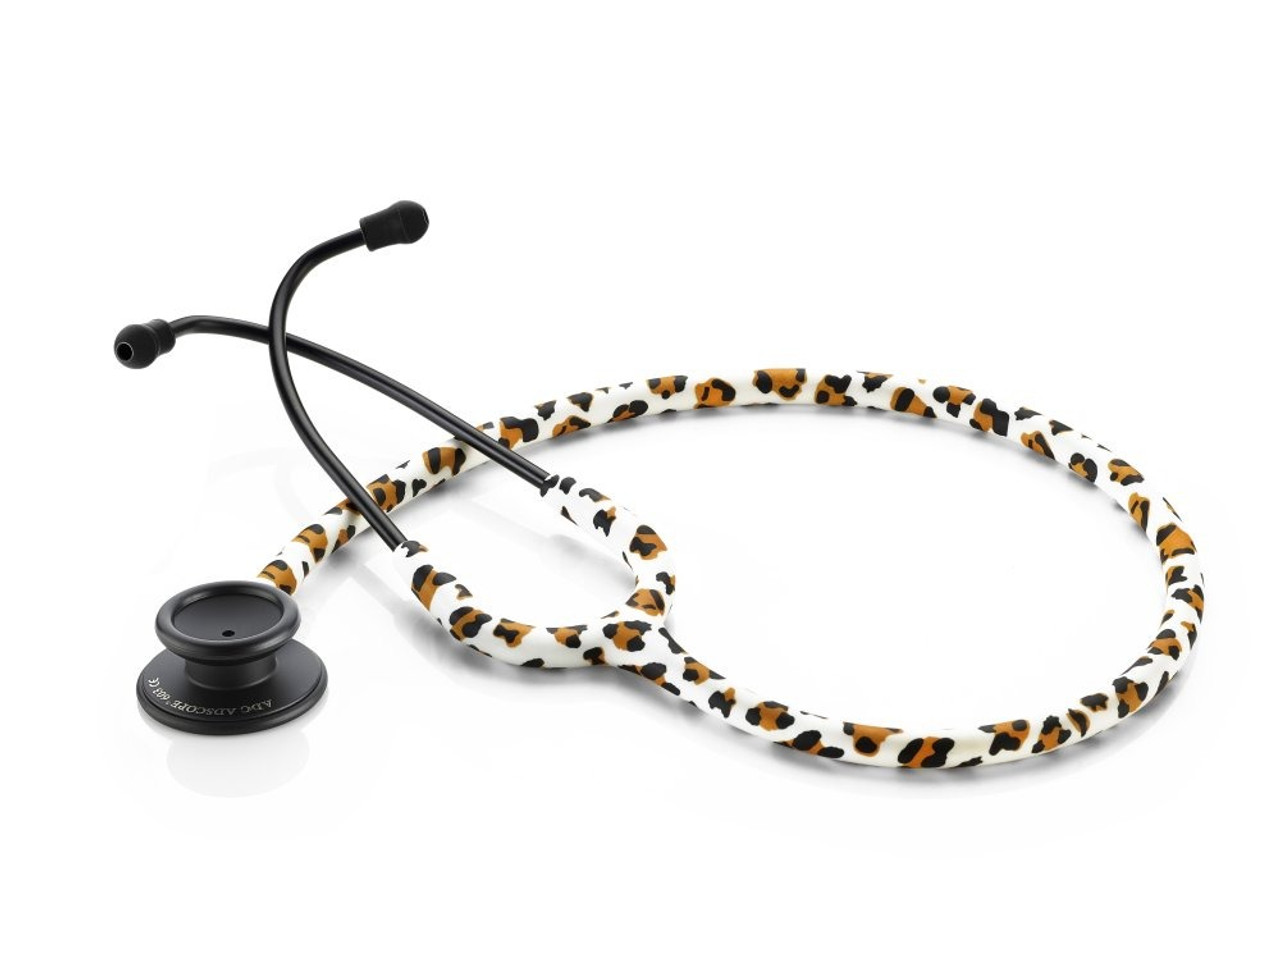 ADC 603 Clinician Stethoscope, Leopard Tactical, 603LPST 